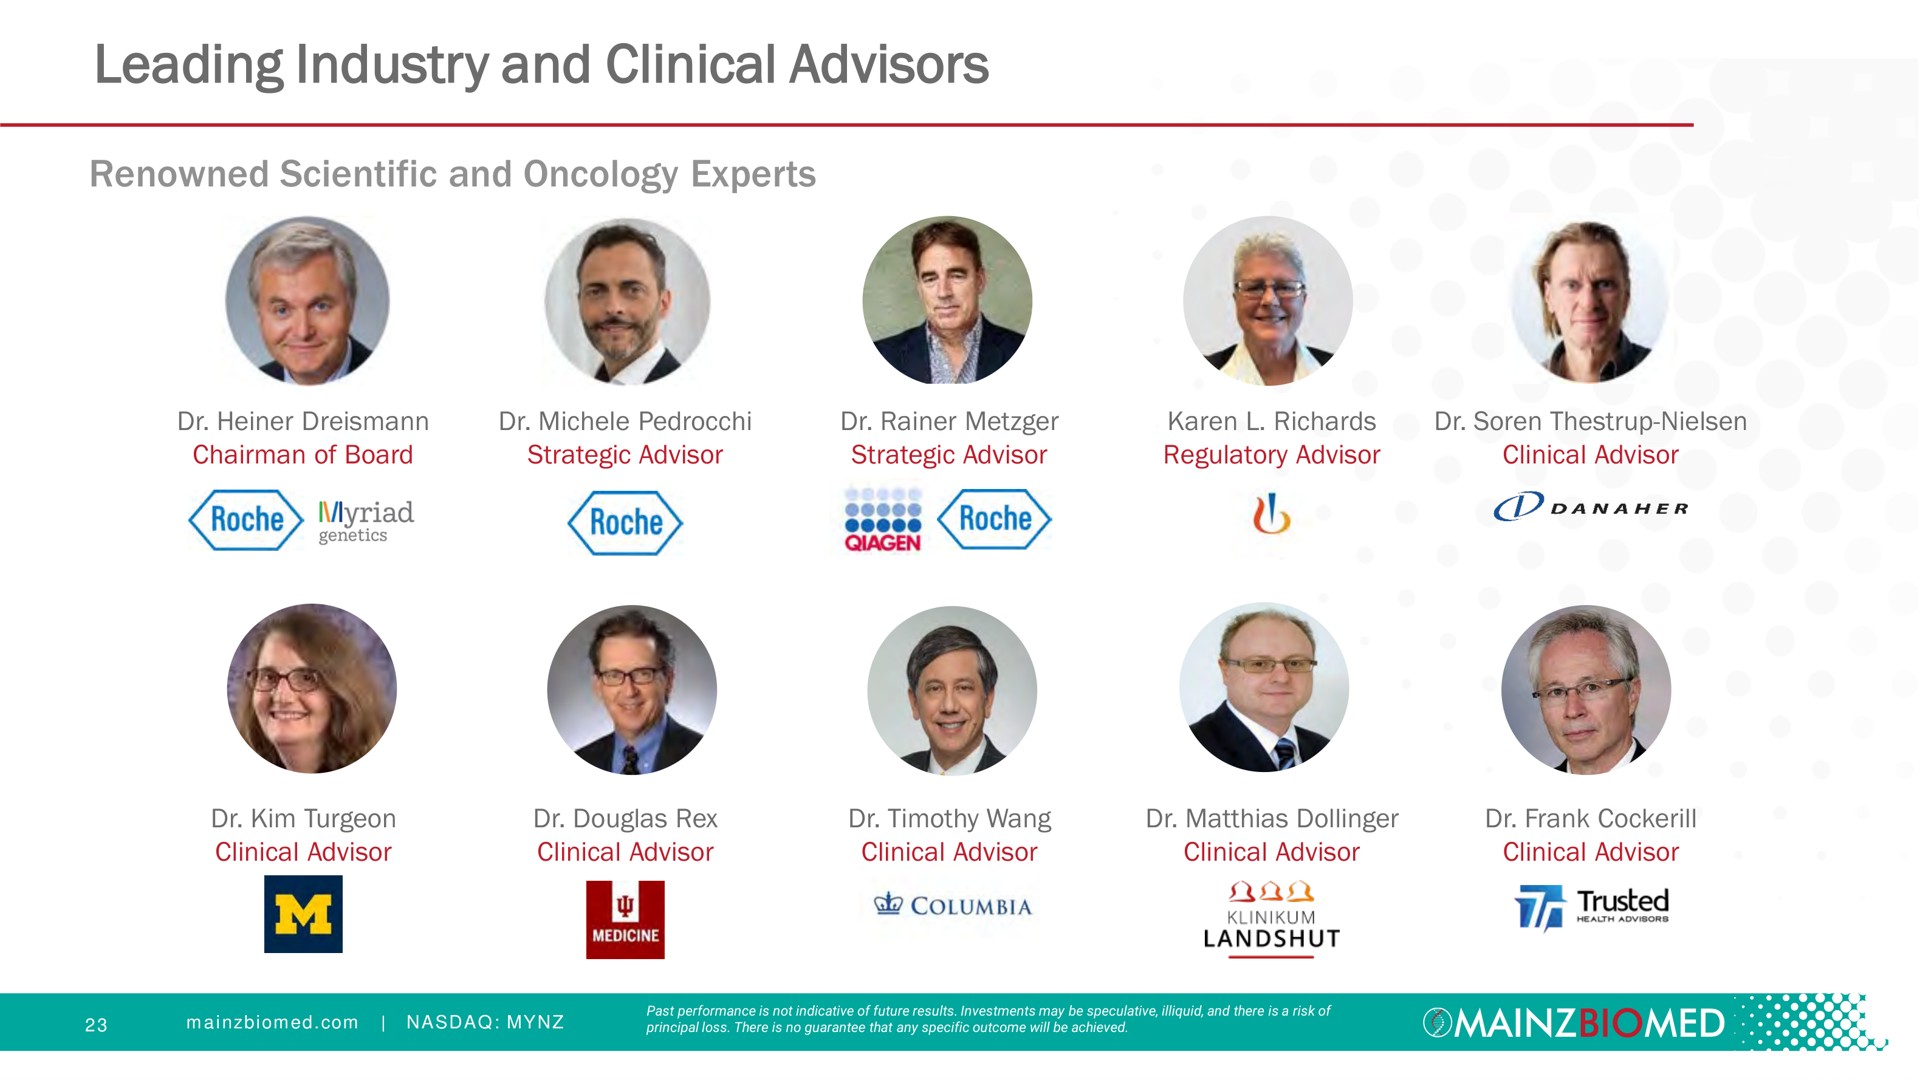 leading industry and clinical advisors myriad | Mainz Biomed NV